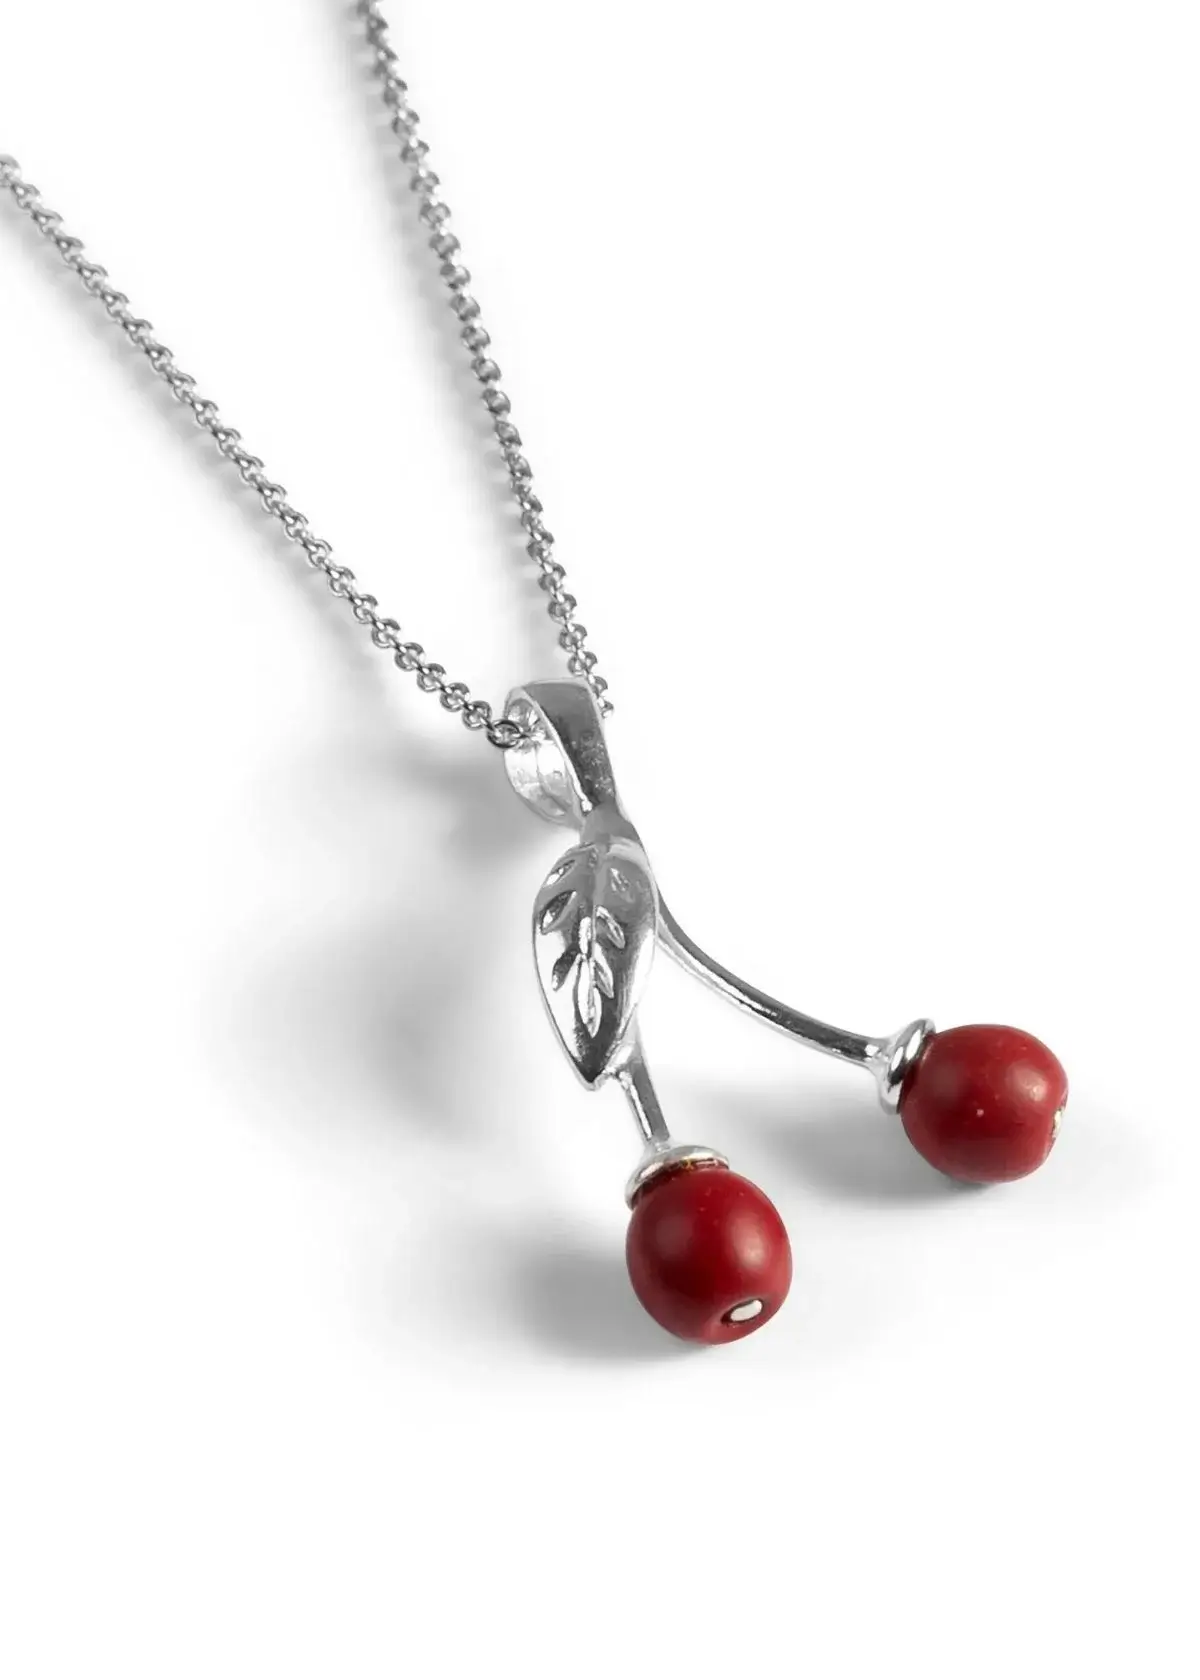 What does a cherry symbolize in a necklace?